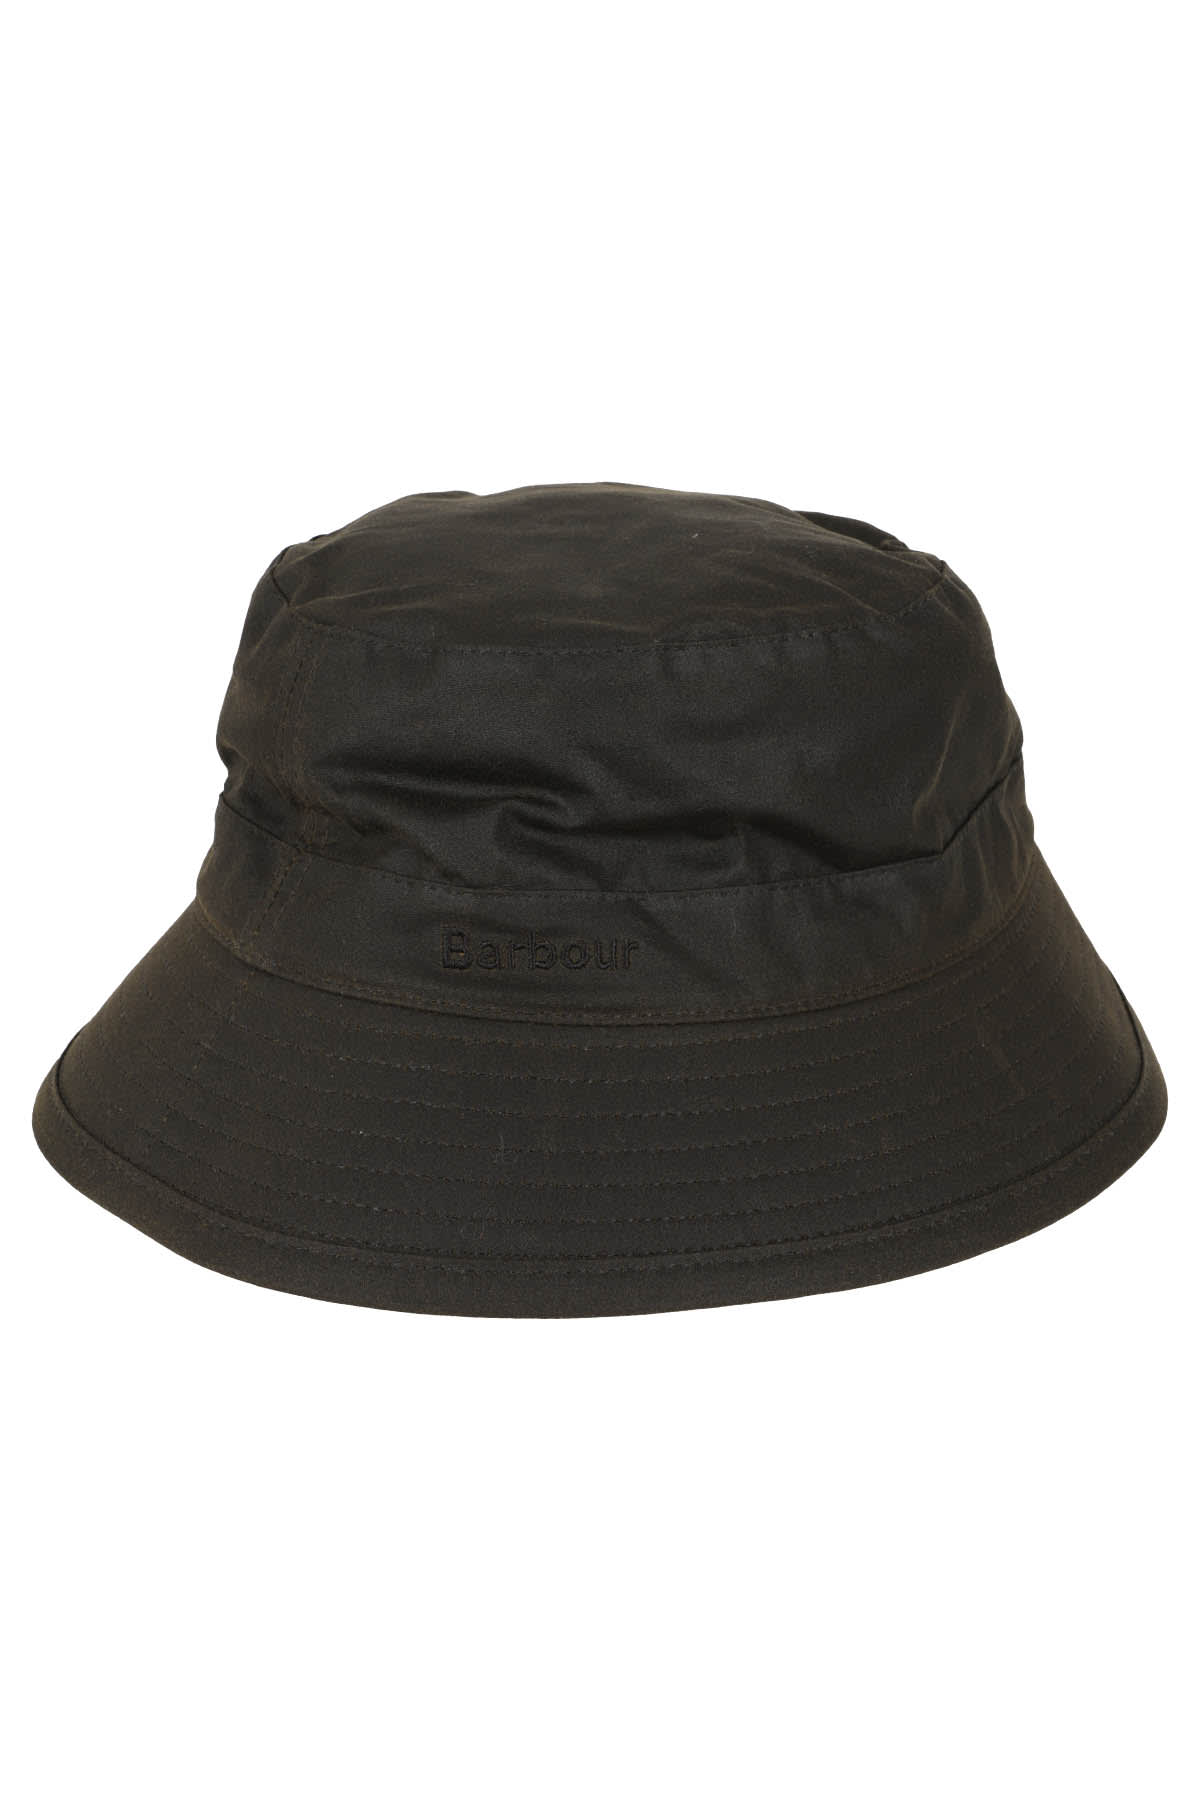 Barbour Wax Sport Hat In Olive